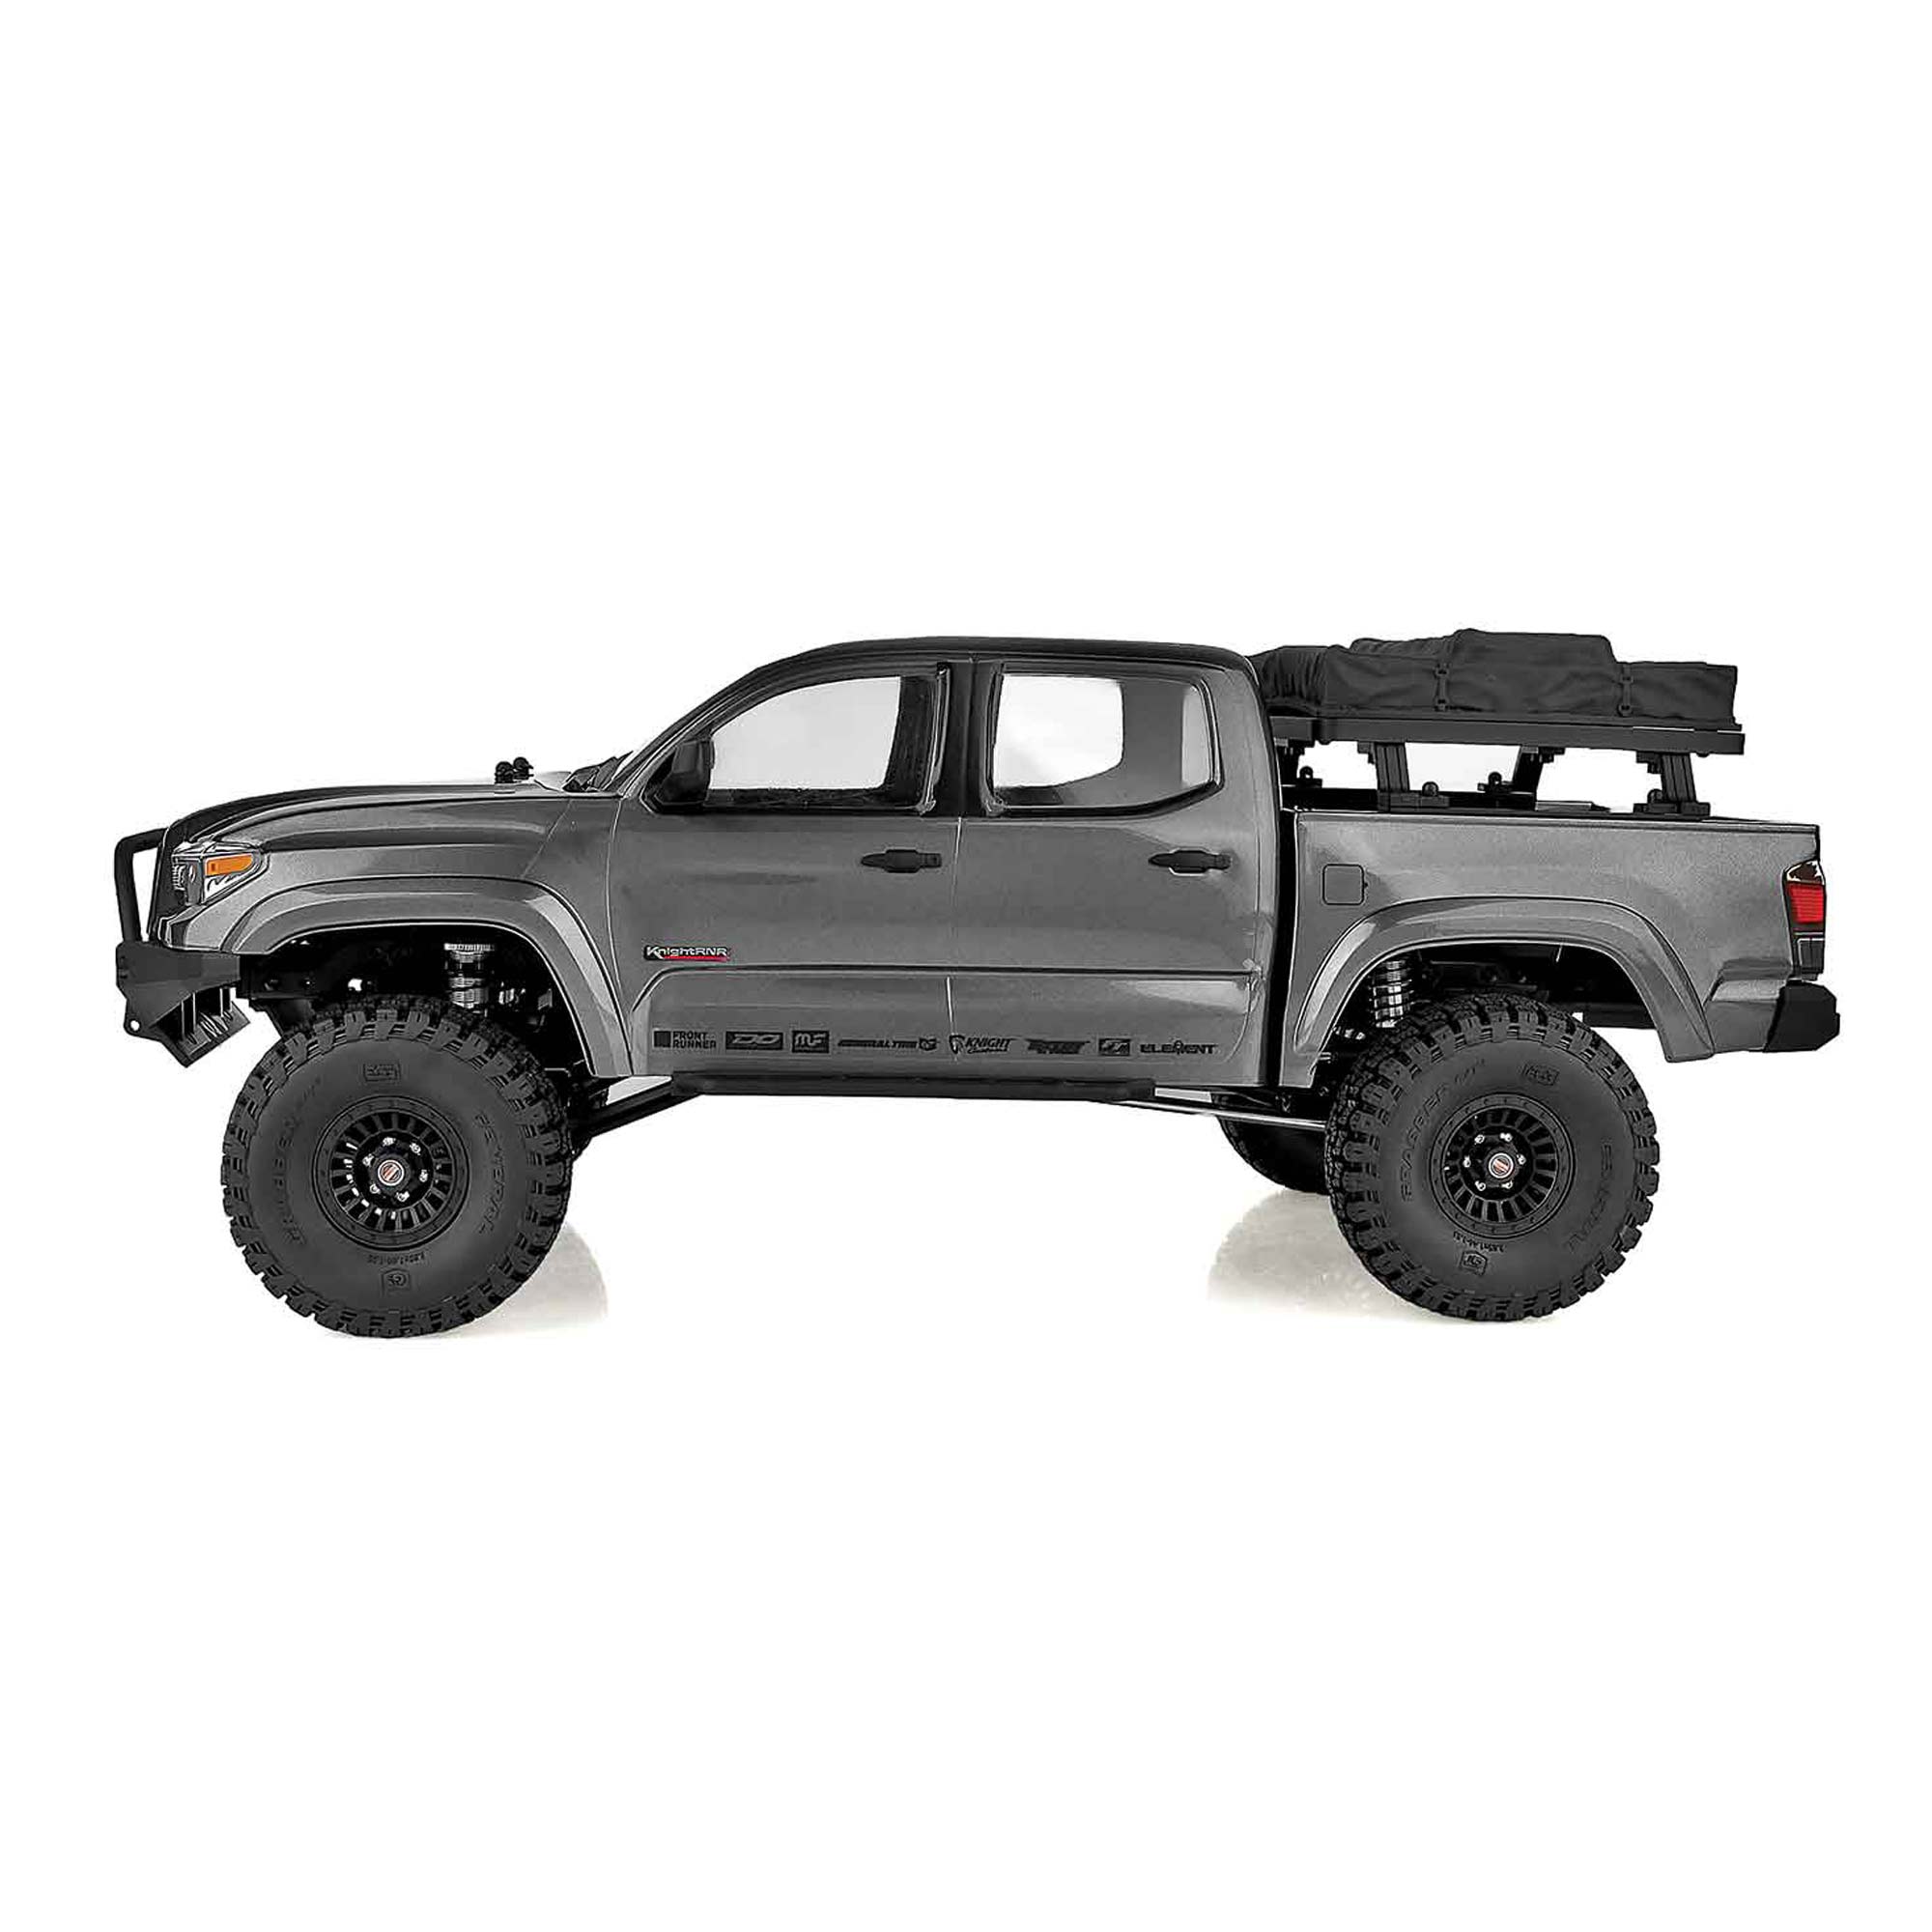 1/10 Enduro Trail Truck, Knightrunner 4WD RTR, Gray